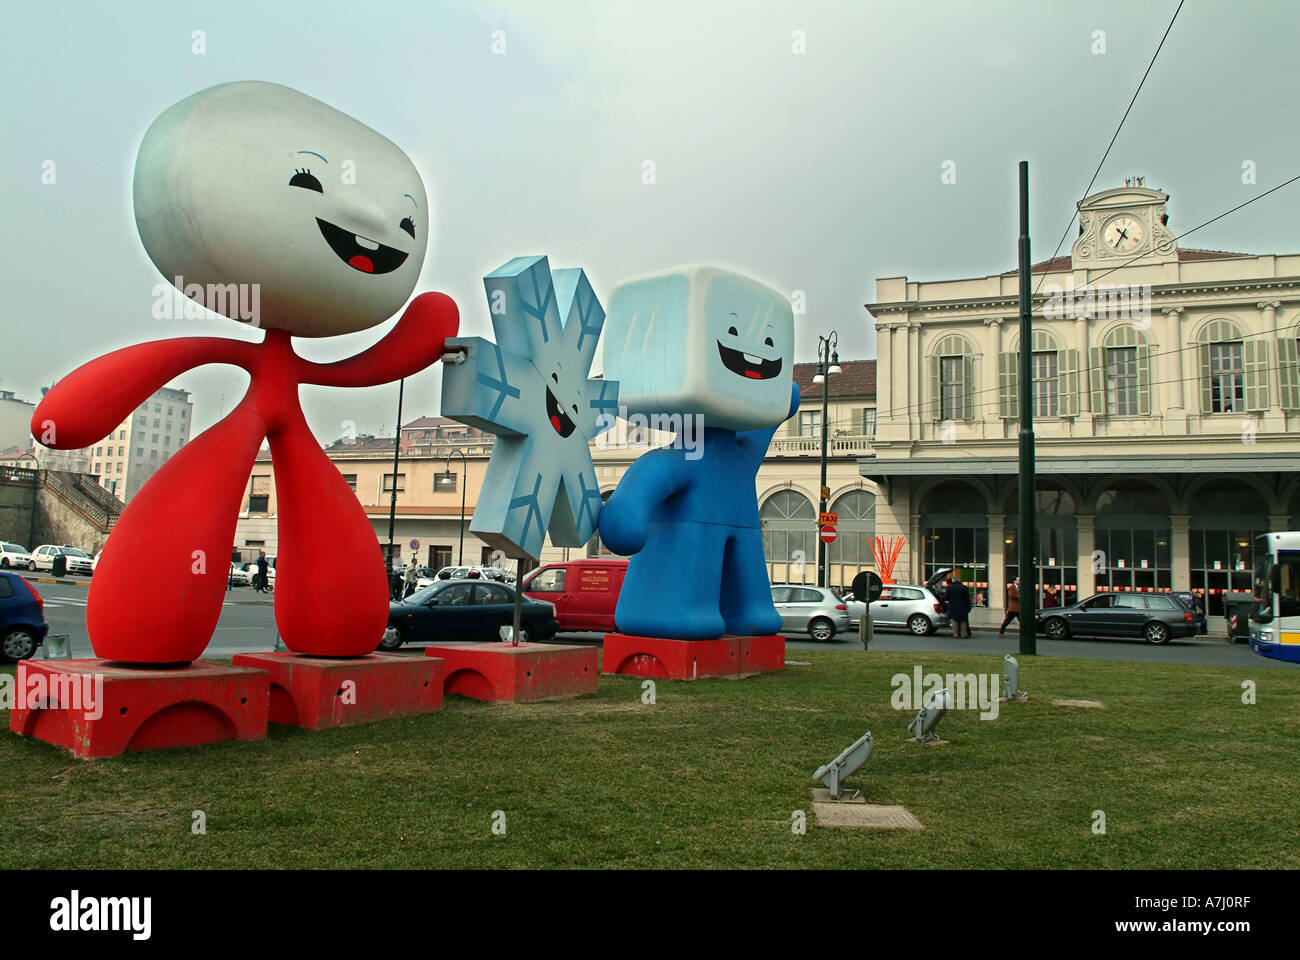 Porta Susa train station in Turin Piedmont Italy - Neve Aster and Gliz mascots for the Olympic Winter Games Stock Photo